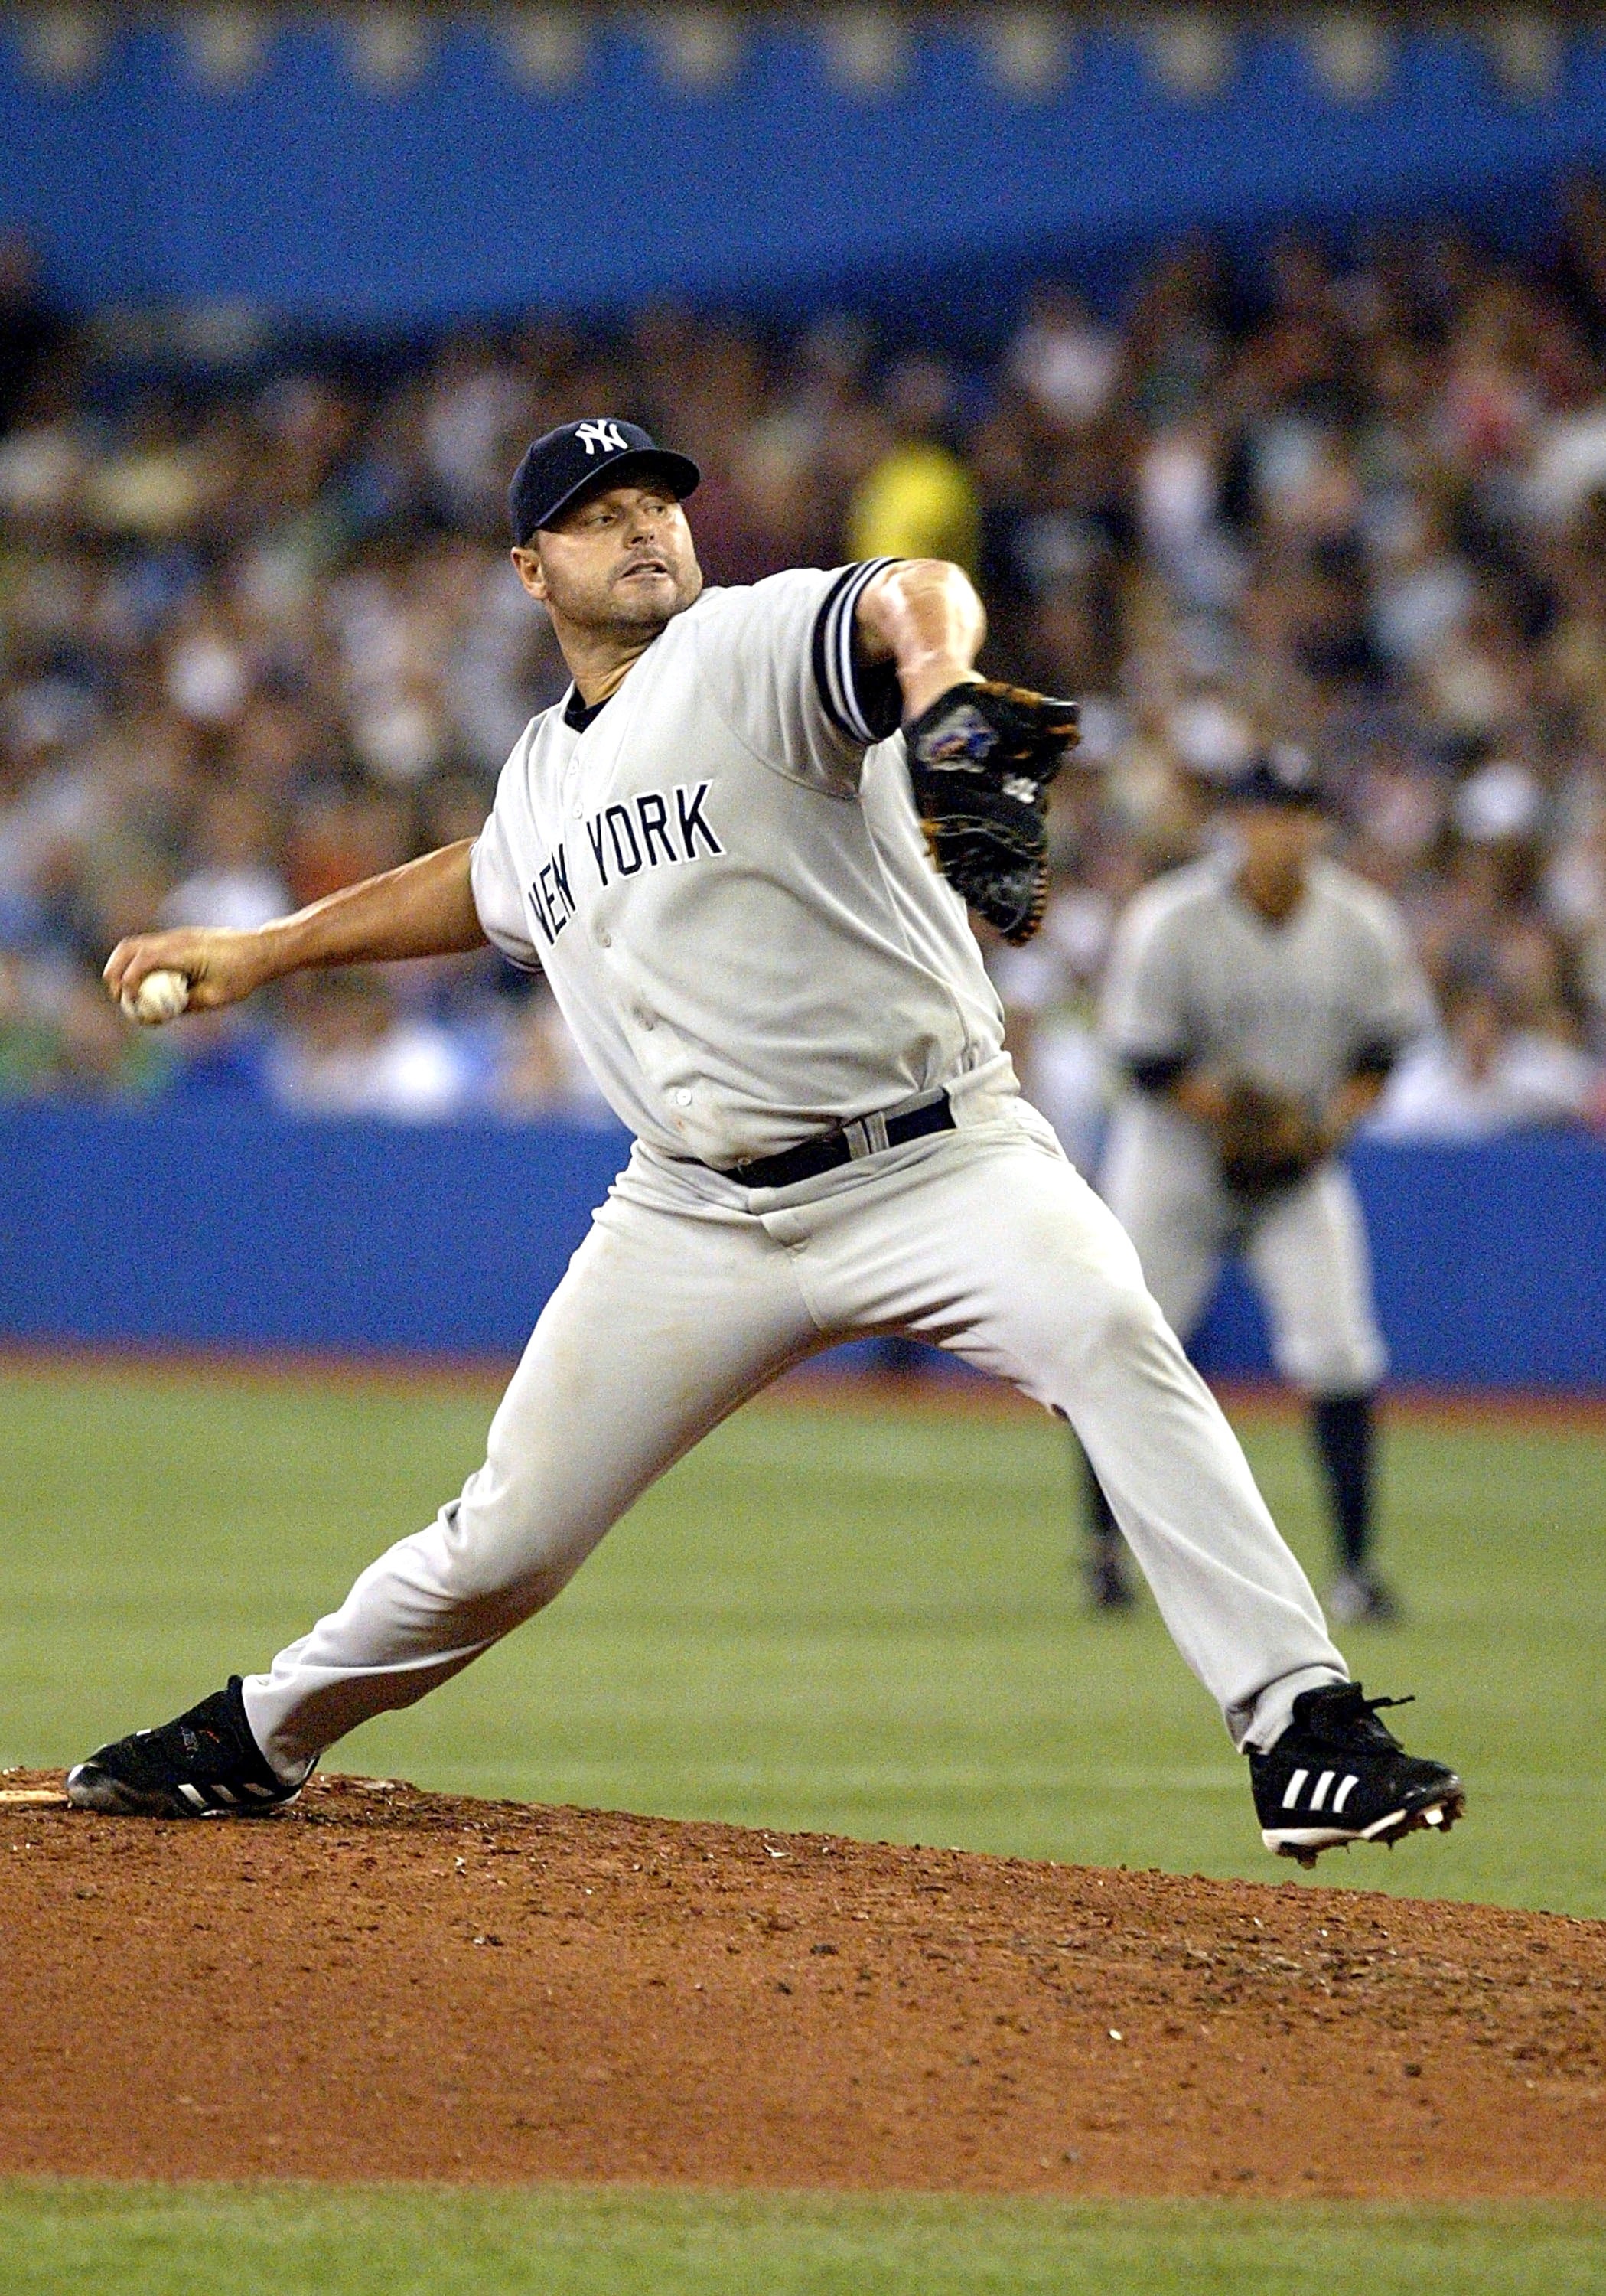 TORONTO - AUGUST 7:  Roger Clemens #22 of the New York Yankees throws a pitch against the Toronto Blue Jays on August 7, 2007 at the Rogers Centre in Toronto, Ontario, Canada. The Yankees defeated the Blue Jays 9-2.  (Photo by Dave Sandford/Getty Images)